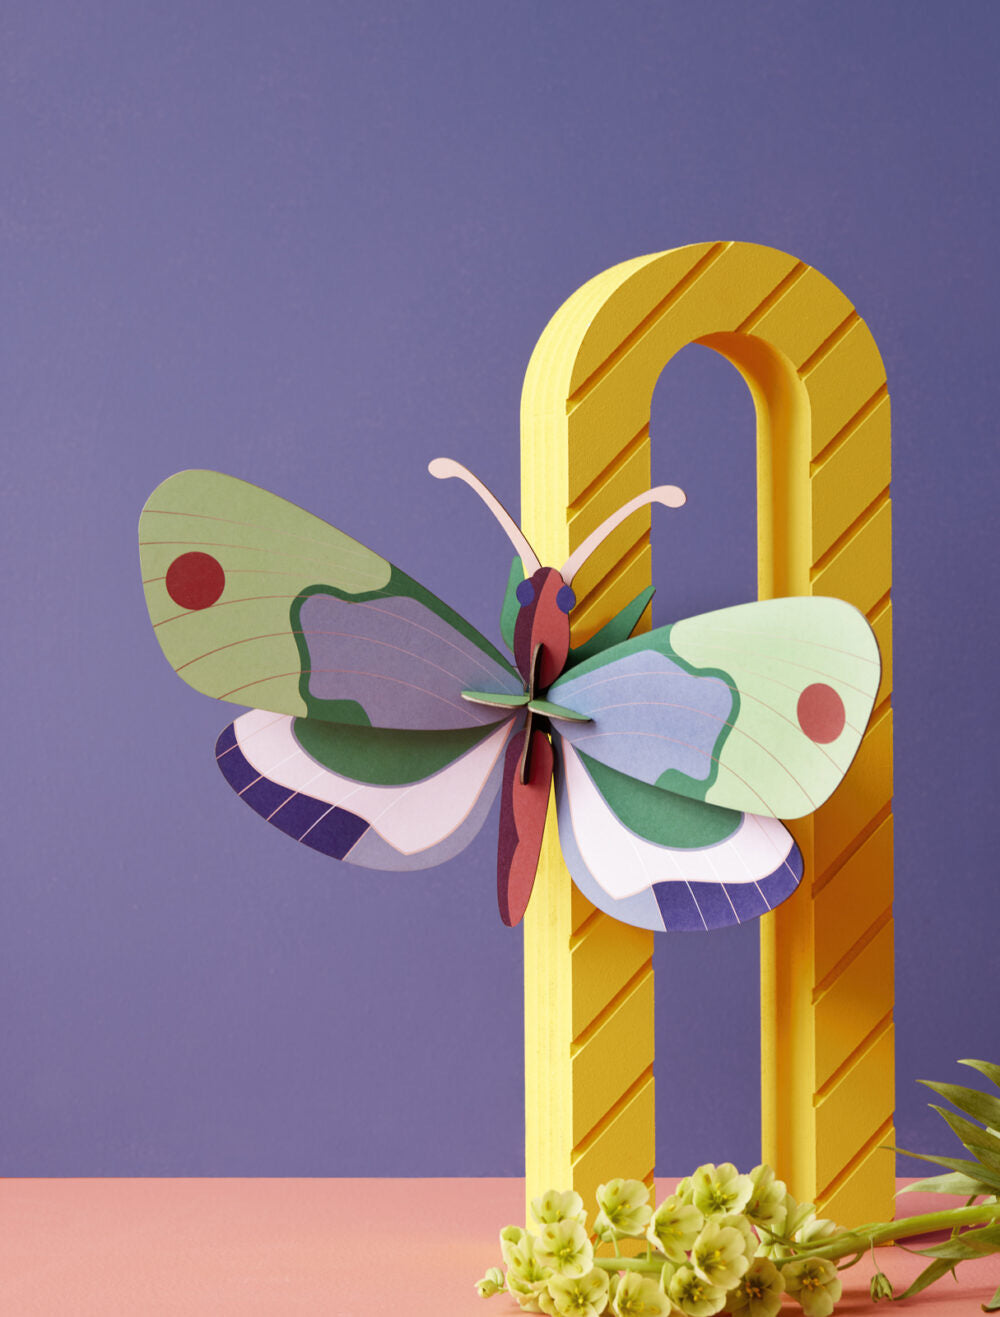 Studio Roof Wall Decoration | Giant Mint Forest Butterfly - Moo Like a Monkey